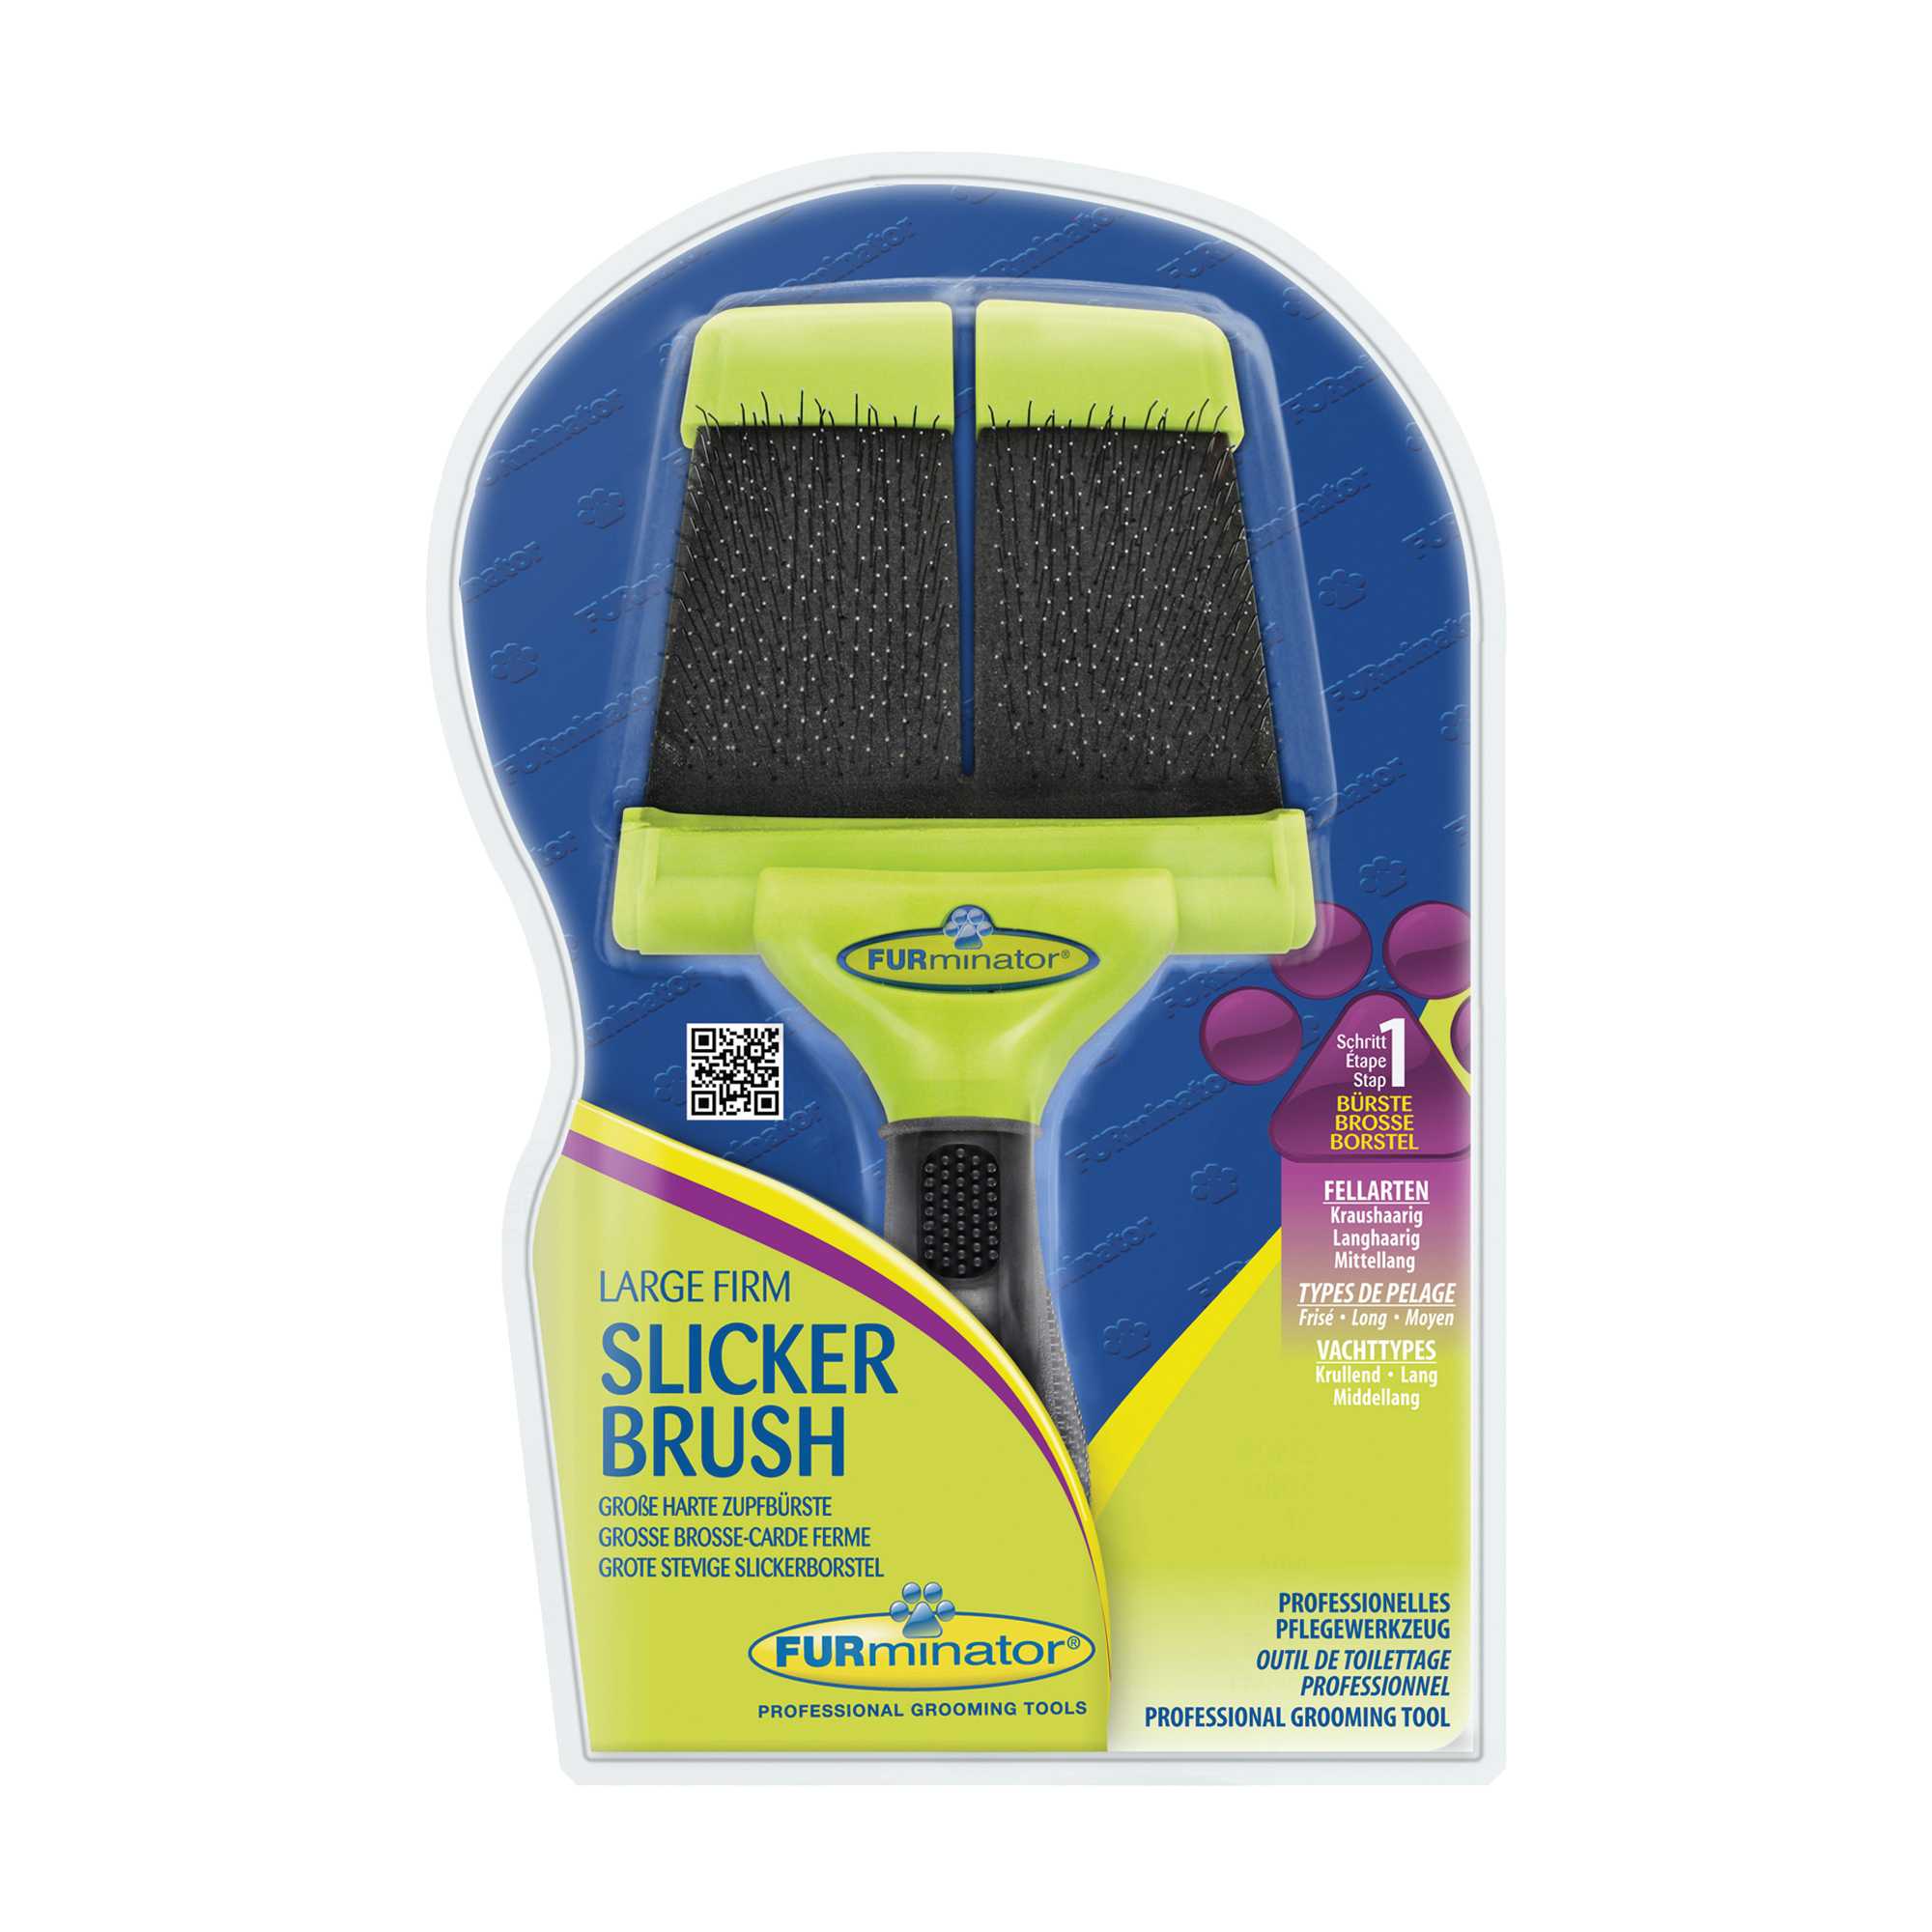 Furminator Firm Slicker Brush Large + product picture